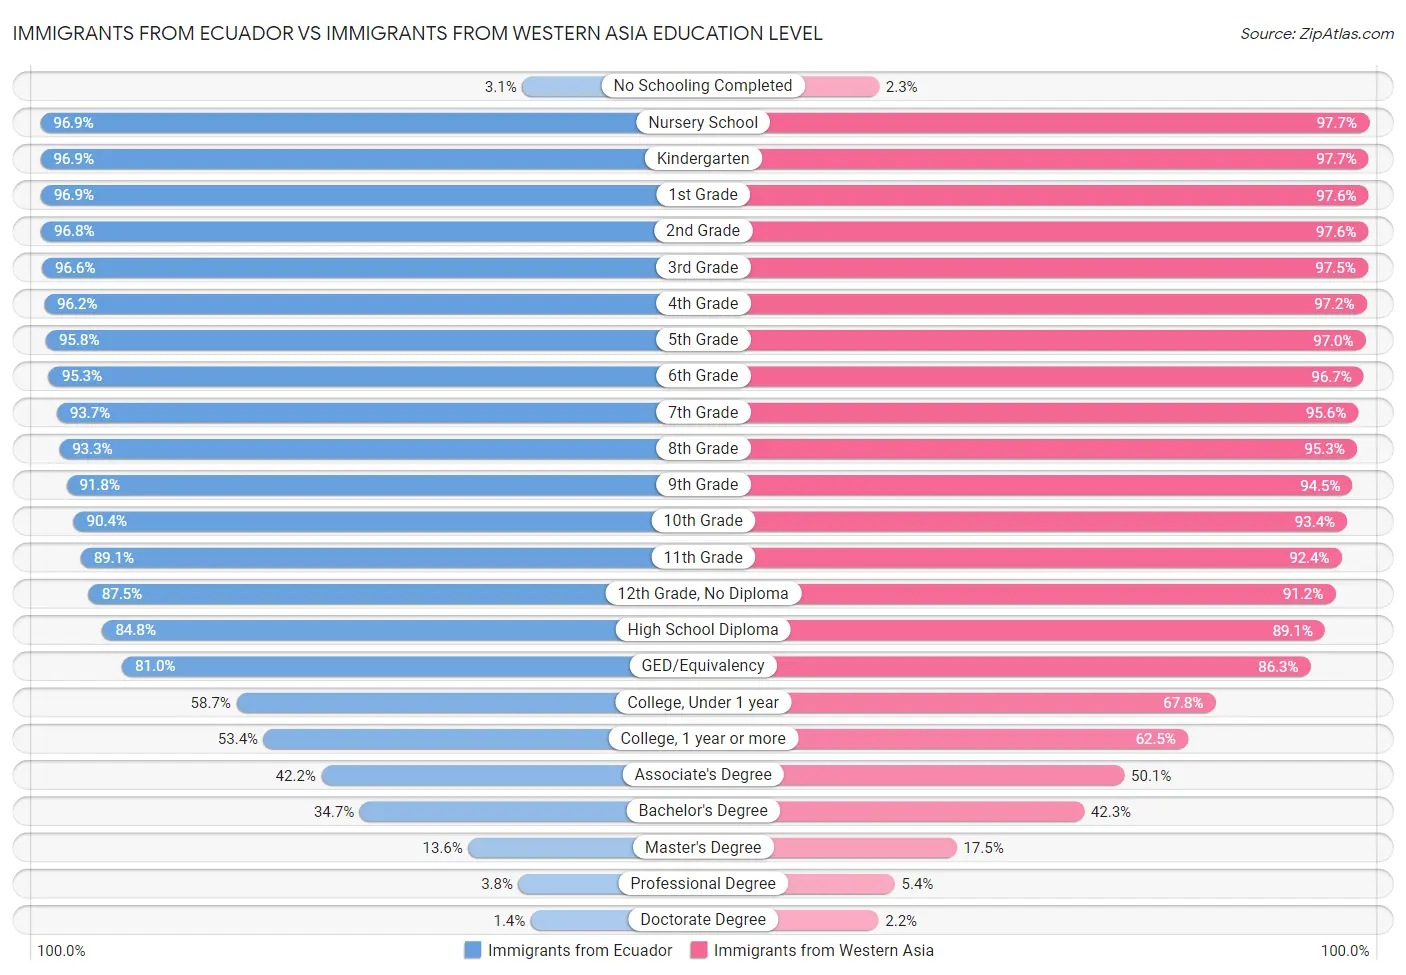 Immigrants from Ecuador vs Immigrants from Western Asia Education Level